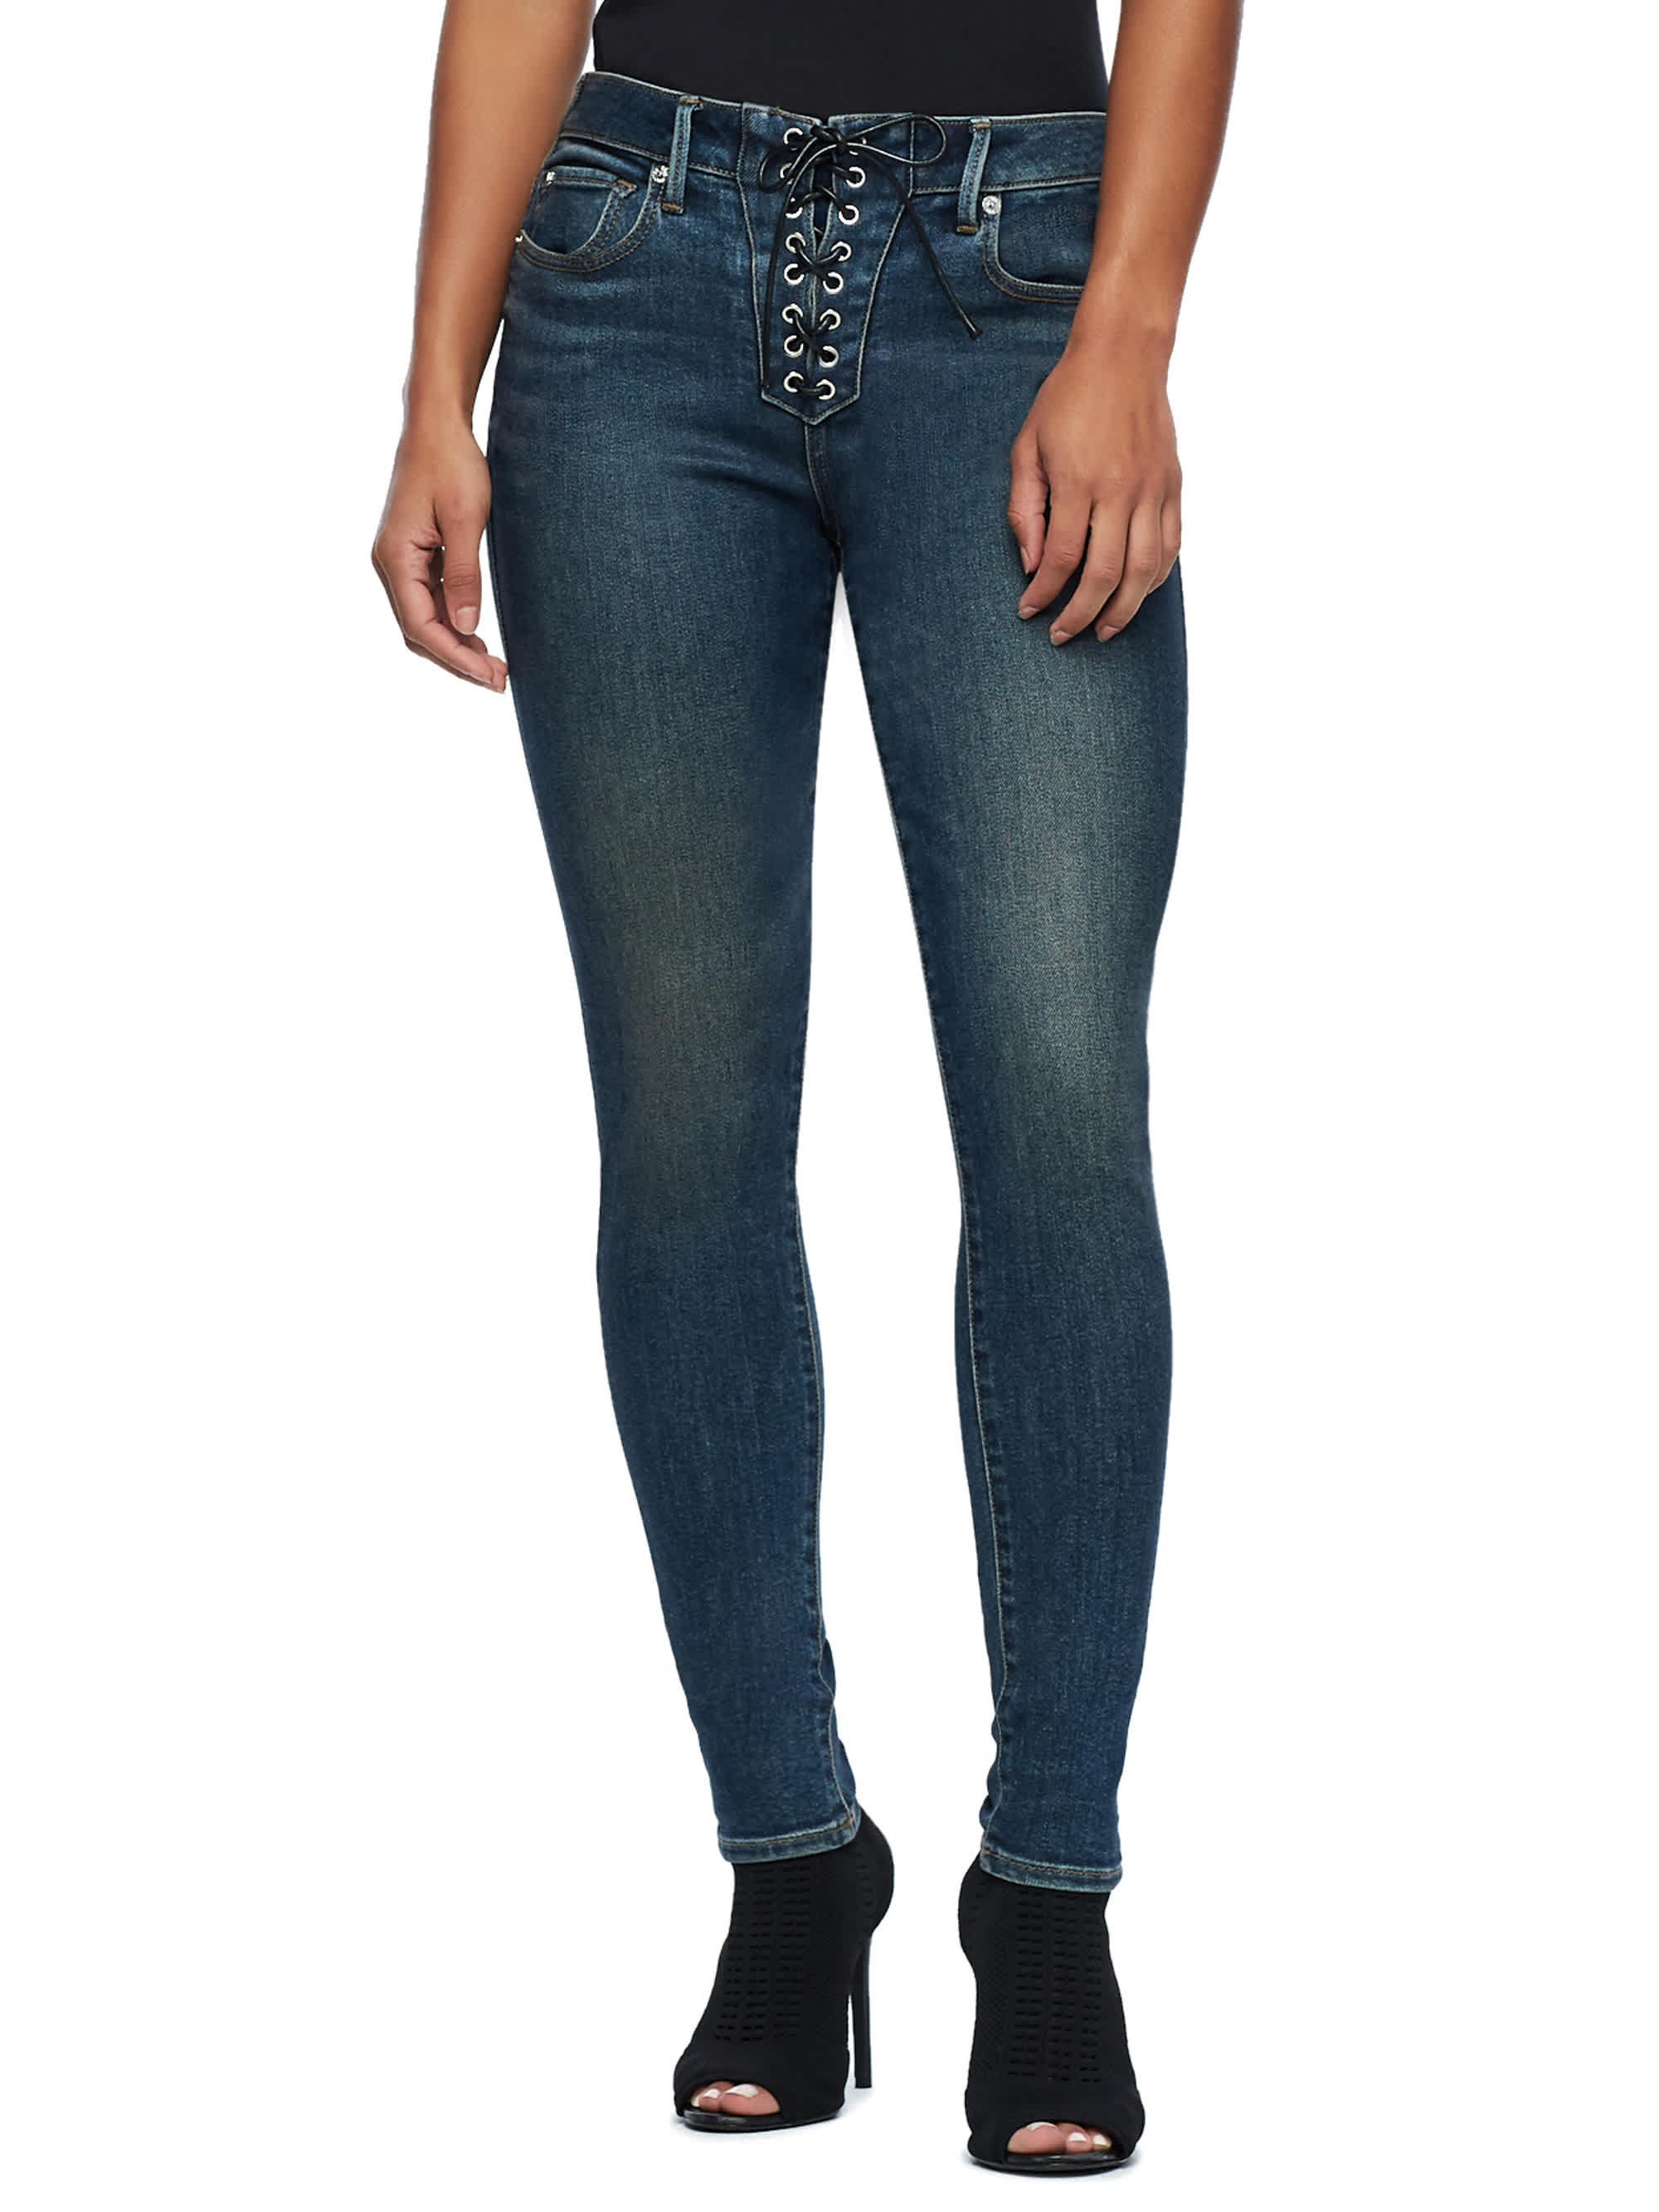 HALLE HIGH RISE LACE UP JEAN